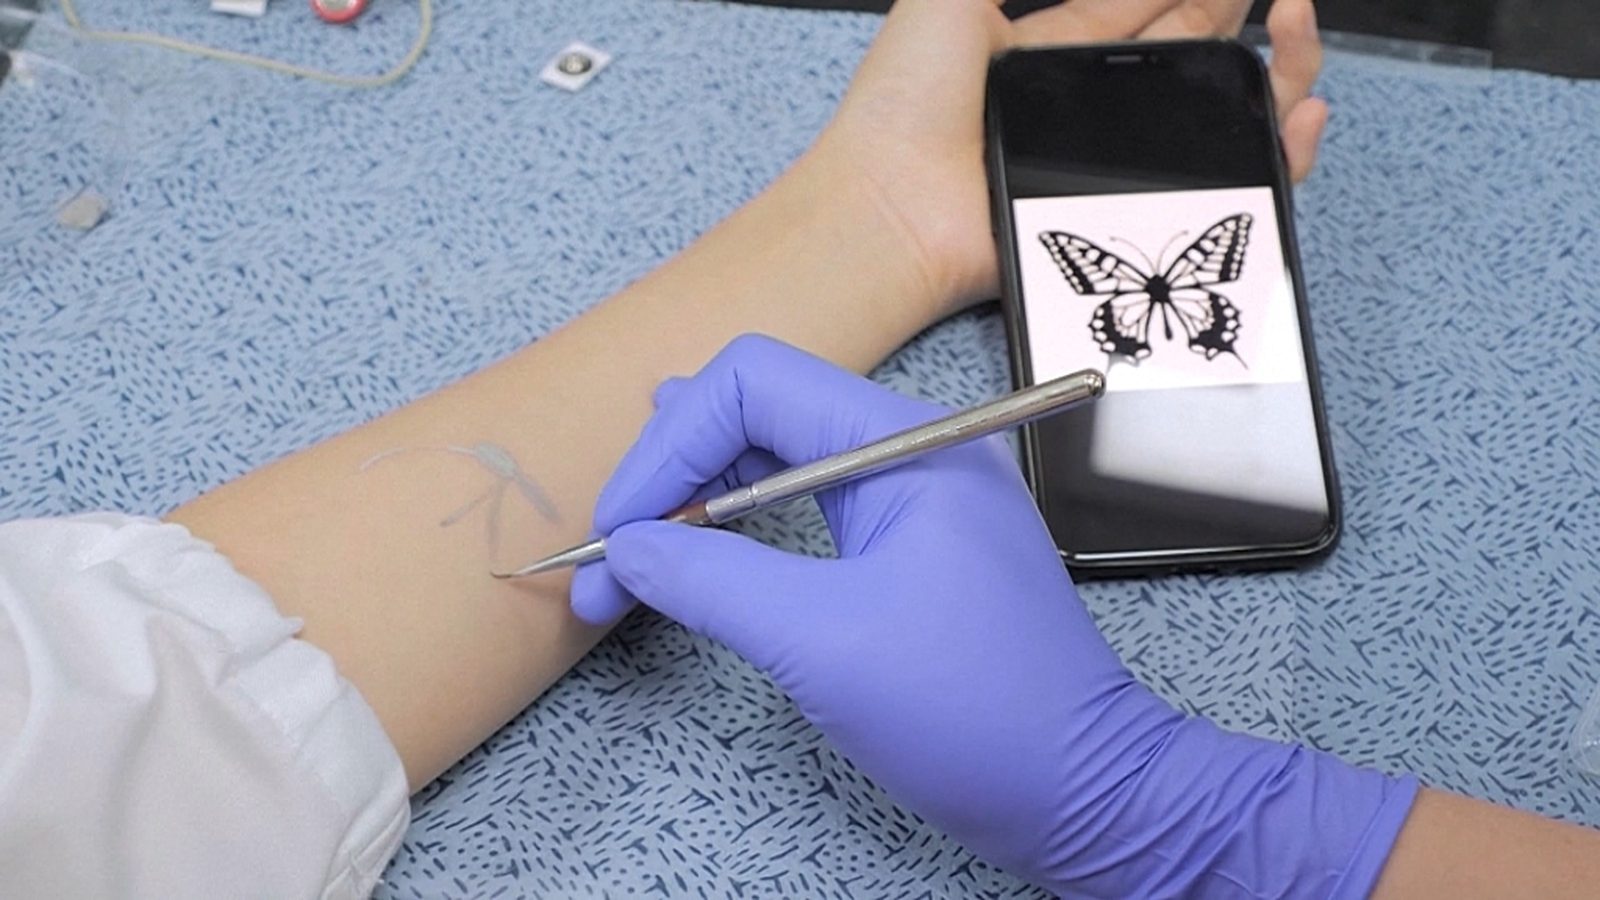 Latest in body art? 'Tattoos' for individual cells | Hub